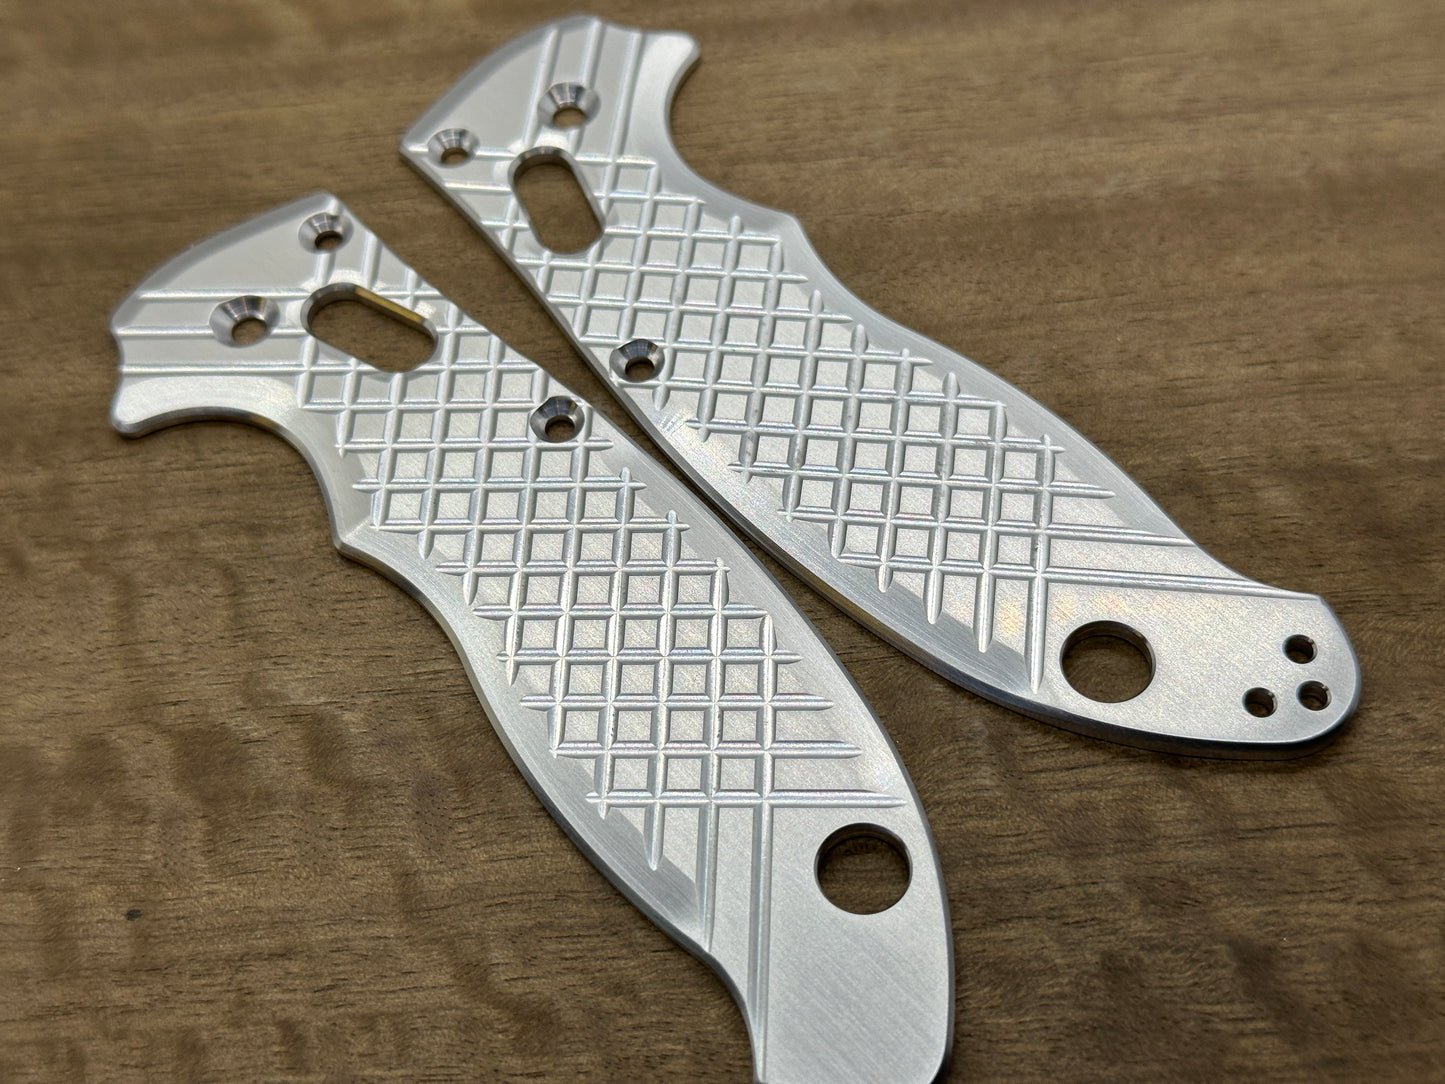 Brushed FRAG milled Titanium Scales for Spyderco MANIX 2